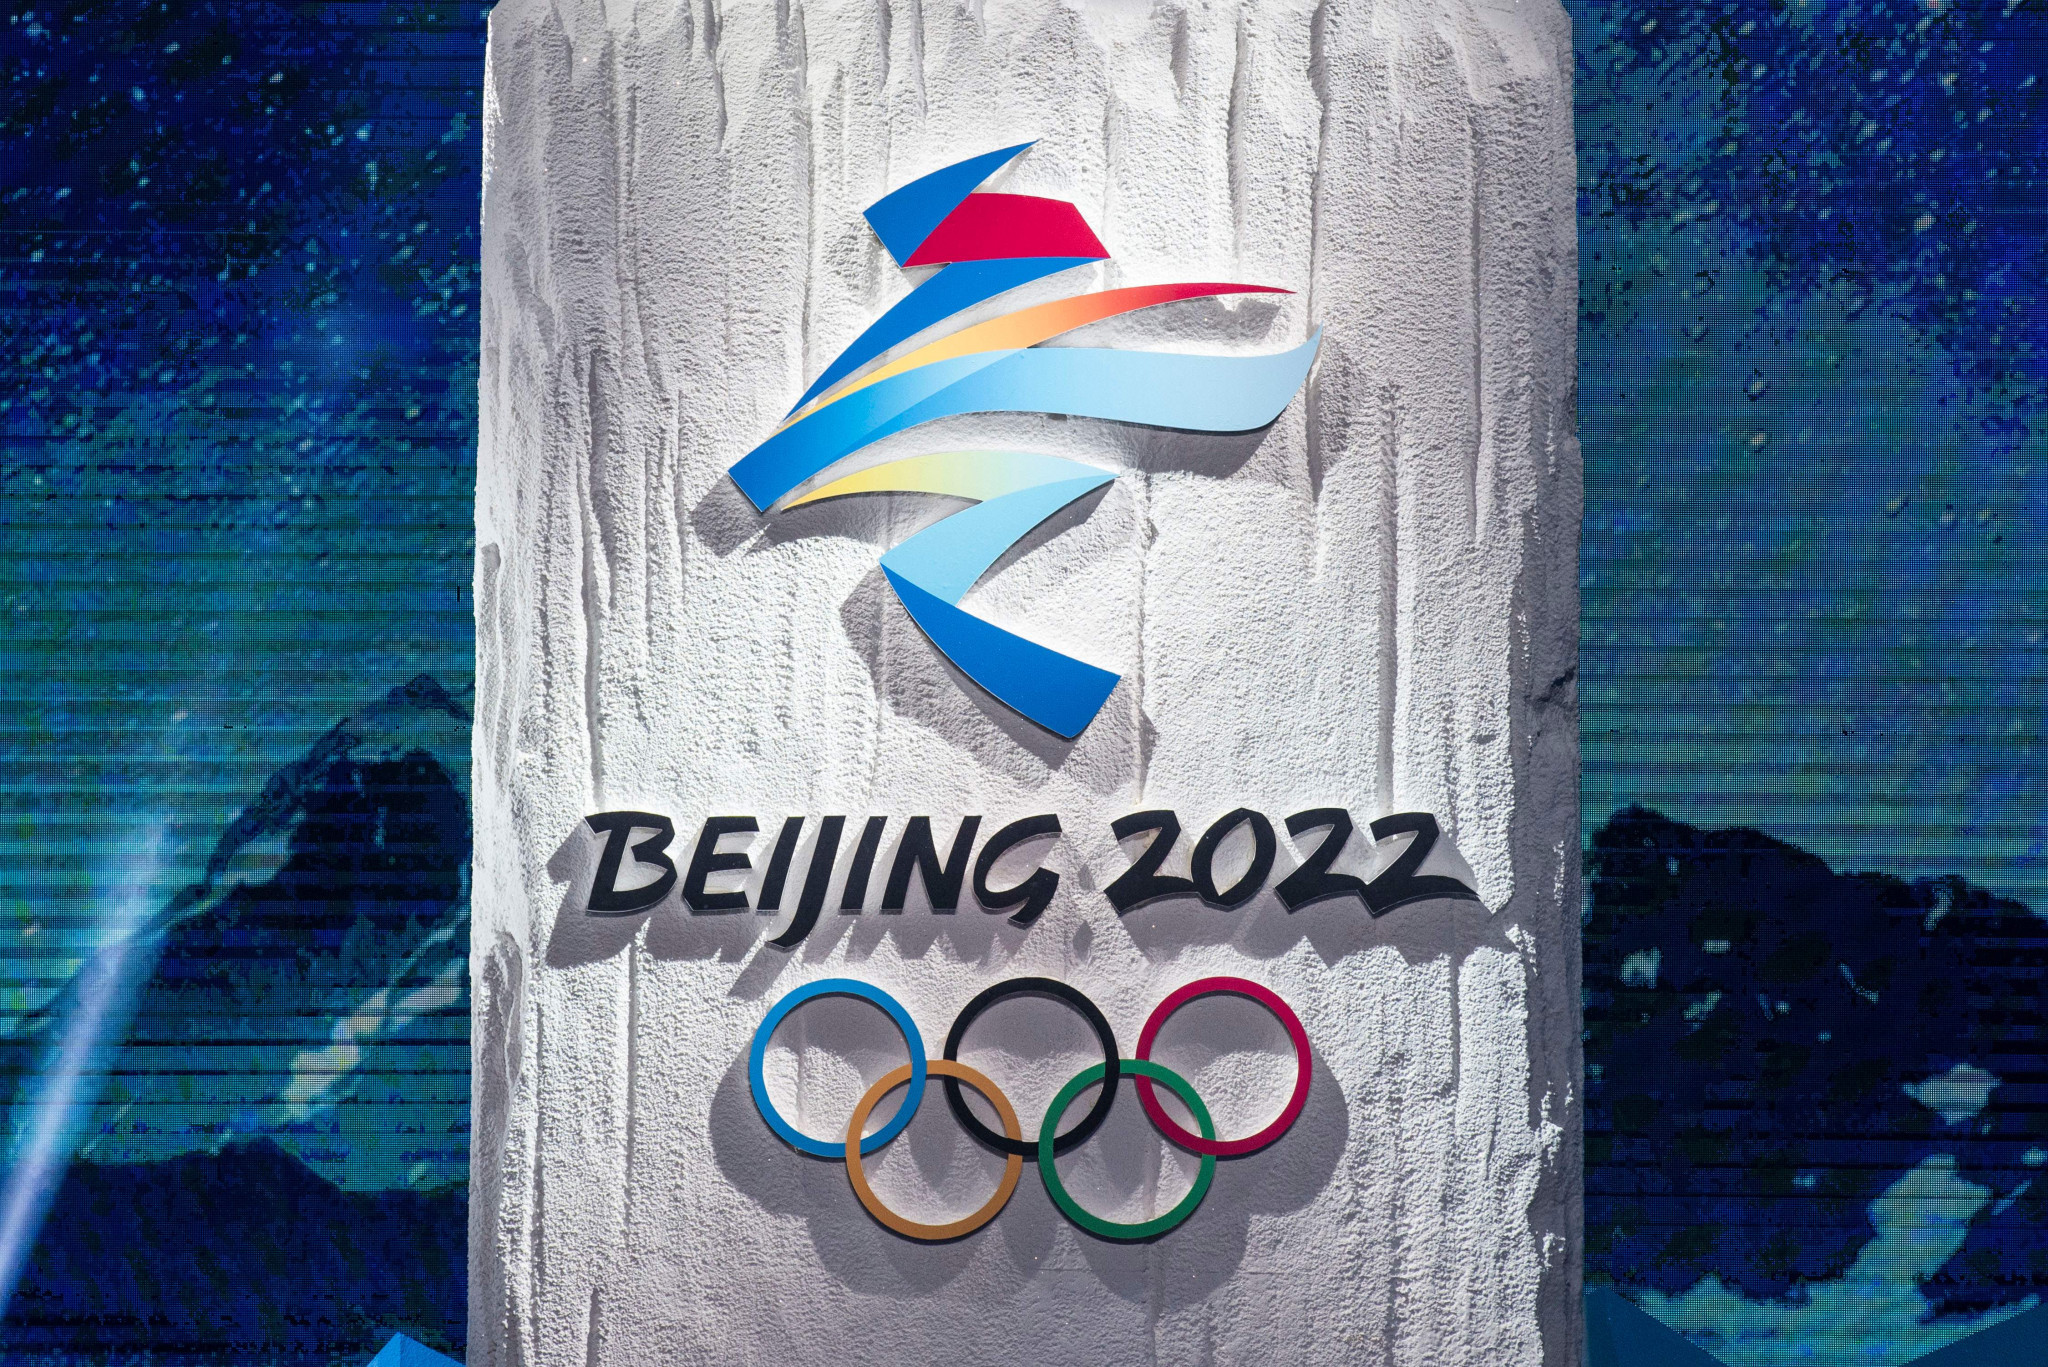 IOC President Thomas Bach says playbooks "should be a way of life", in calls held to mark 30 days until the Opening Ceremony of Beijing 2022 ©Getty Images